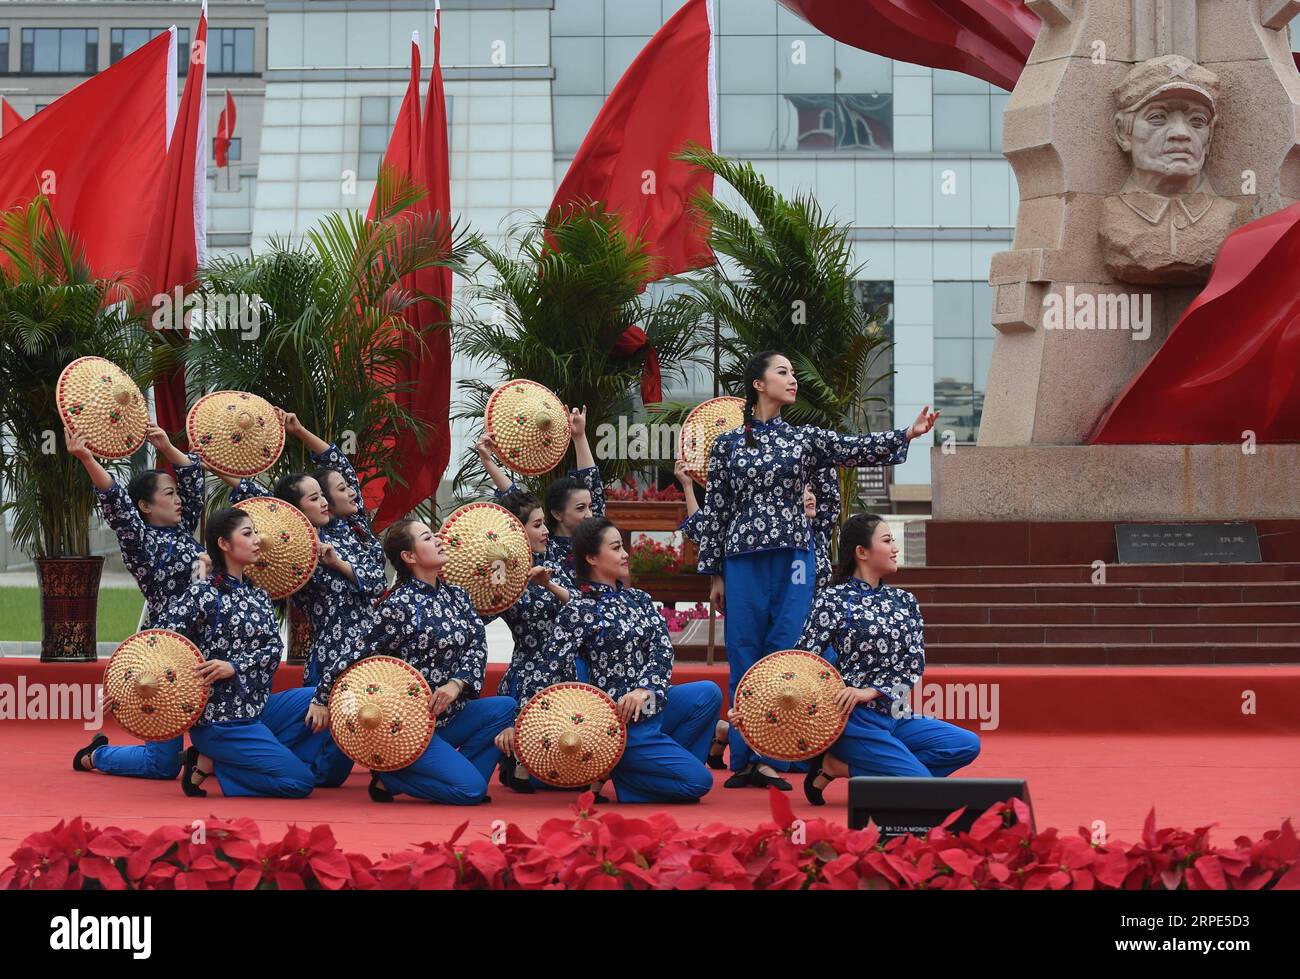 (190818) -- HUINING, Aug. 18, 2019 -- Staff members from Gansu Daily perform dance during an event marking the conclusion of an activity that took journalists to retrace the route of the Long March, in Huining, northwest China s Gansu Province, Aug. 18, 2019. The activity, held from June 11 to Aug. 18, was aimed at paying tribute to the revolutionary martyrs and passing on the traditions of revolution. The Long March was a military maneuver carried out by the Chinese Workers and Peasants Red Army from 1934 to 1936. During this period, they left their bases and marched through rivers, mountains Stock Photo